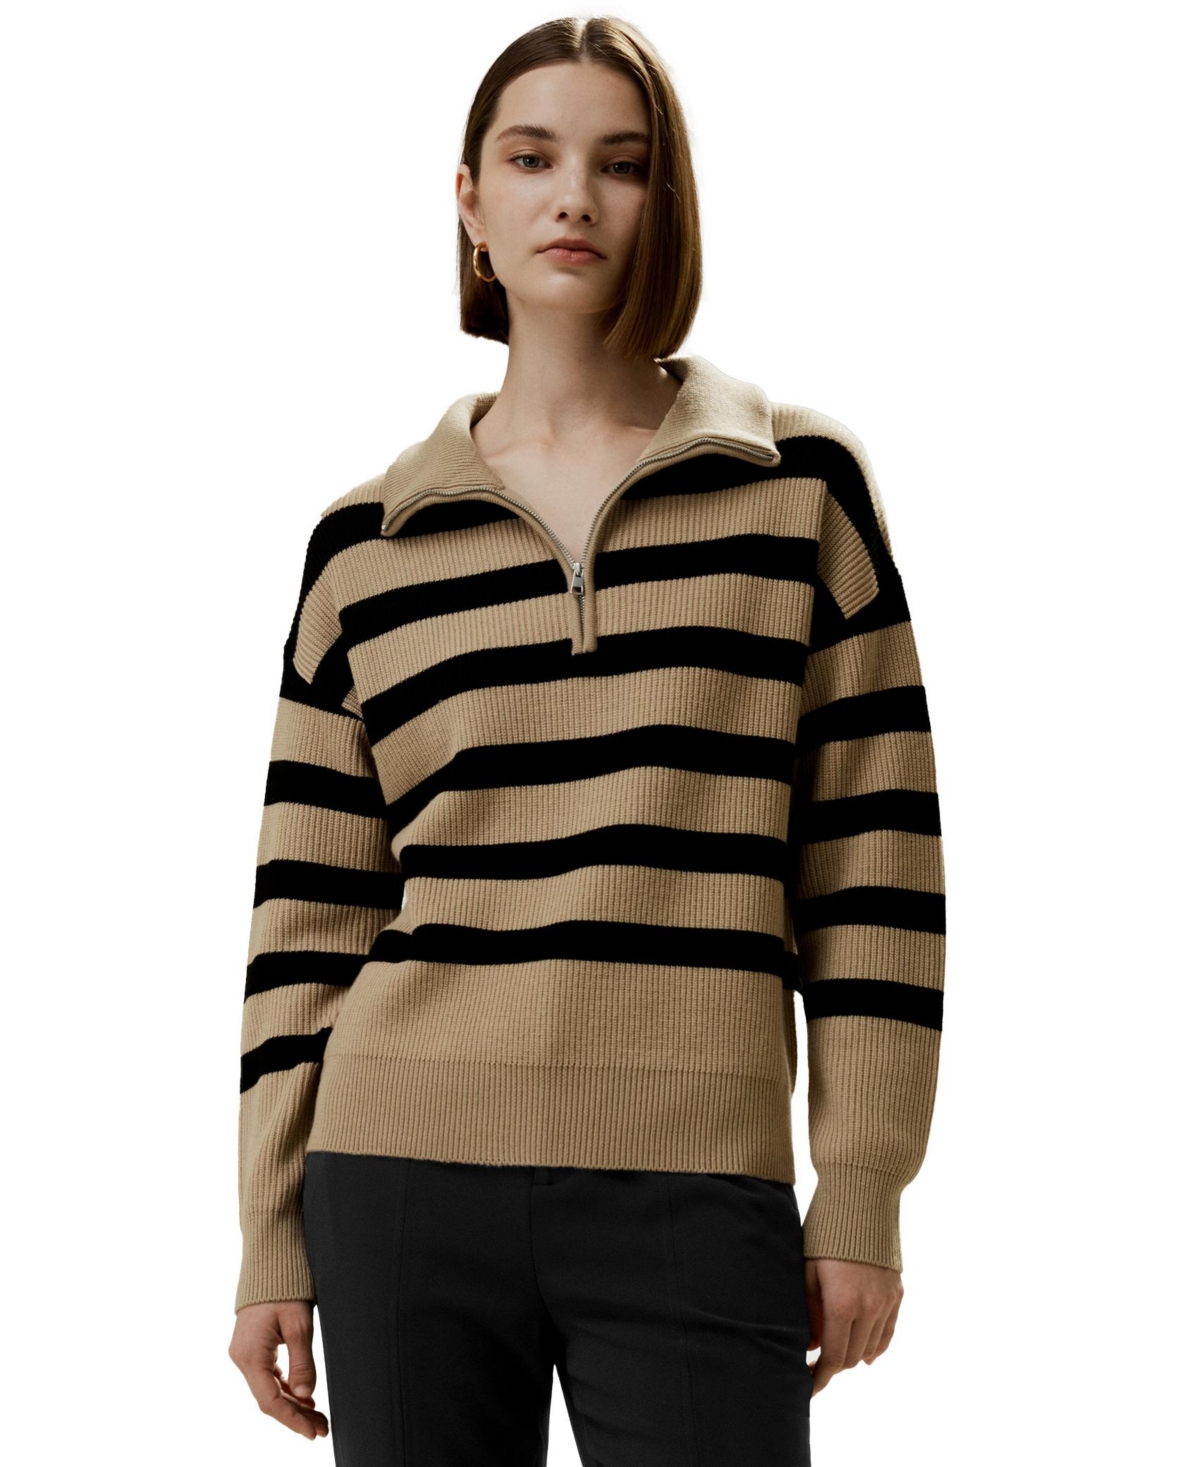 Women's Collared Quarter-Zip Wool Sweater for Women - Navy blue and white stripes